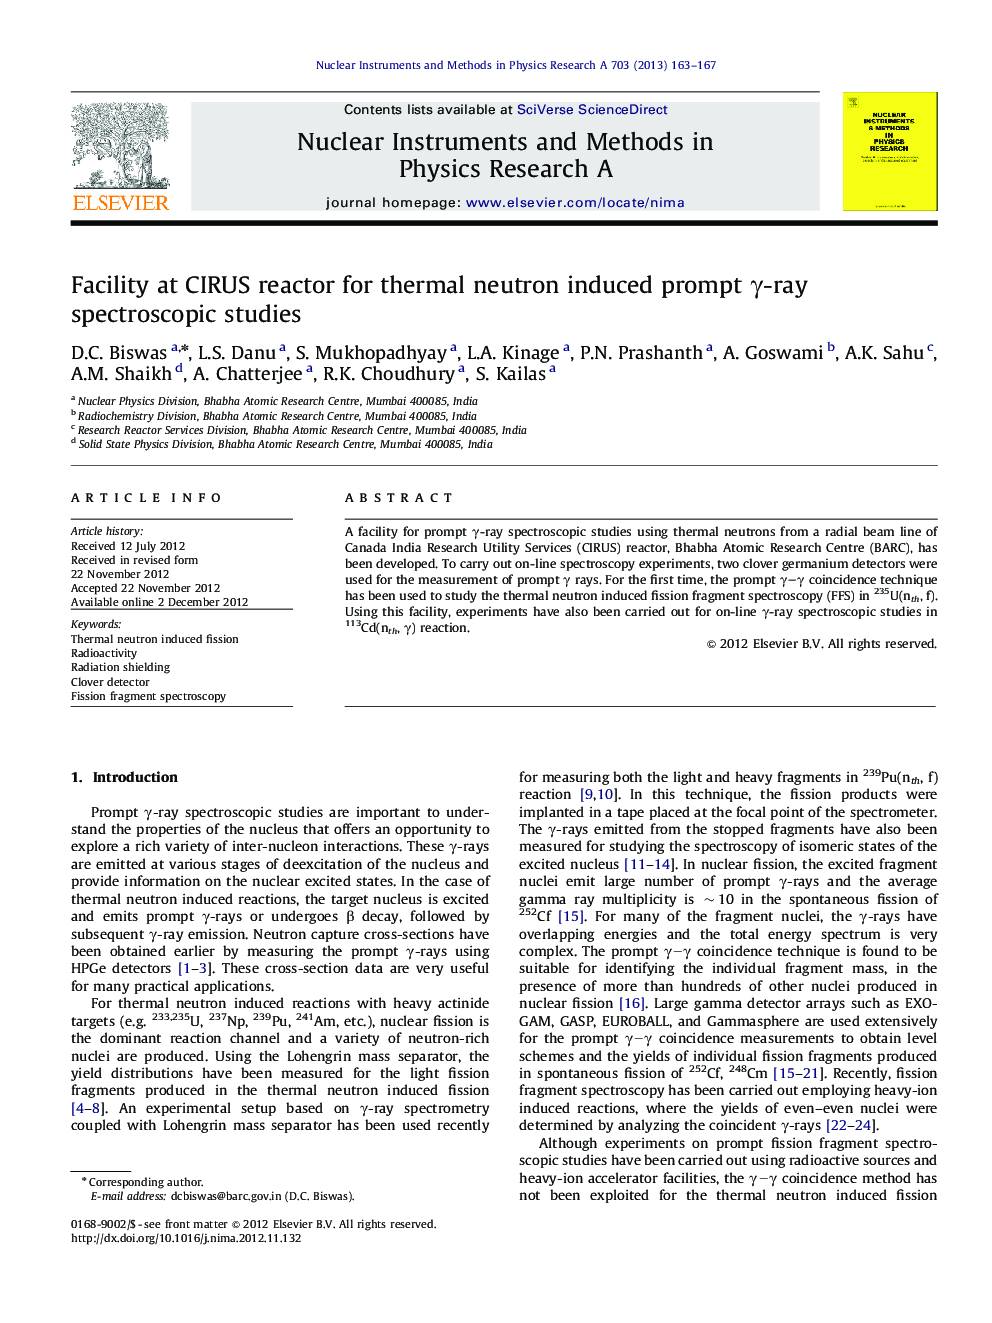 Facility at CIRUS reactor for thermal neutron induced prompt γ-rayγ-ray spectroscopic studies